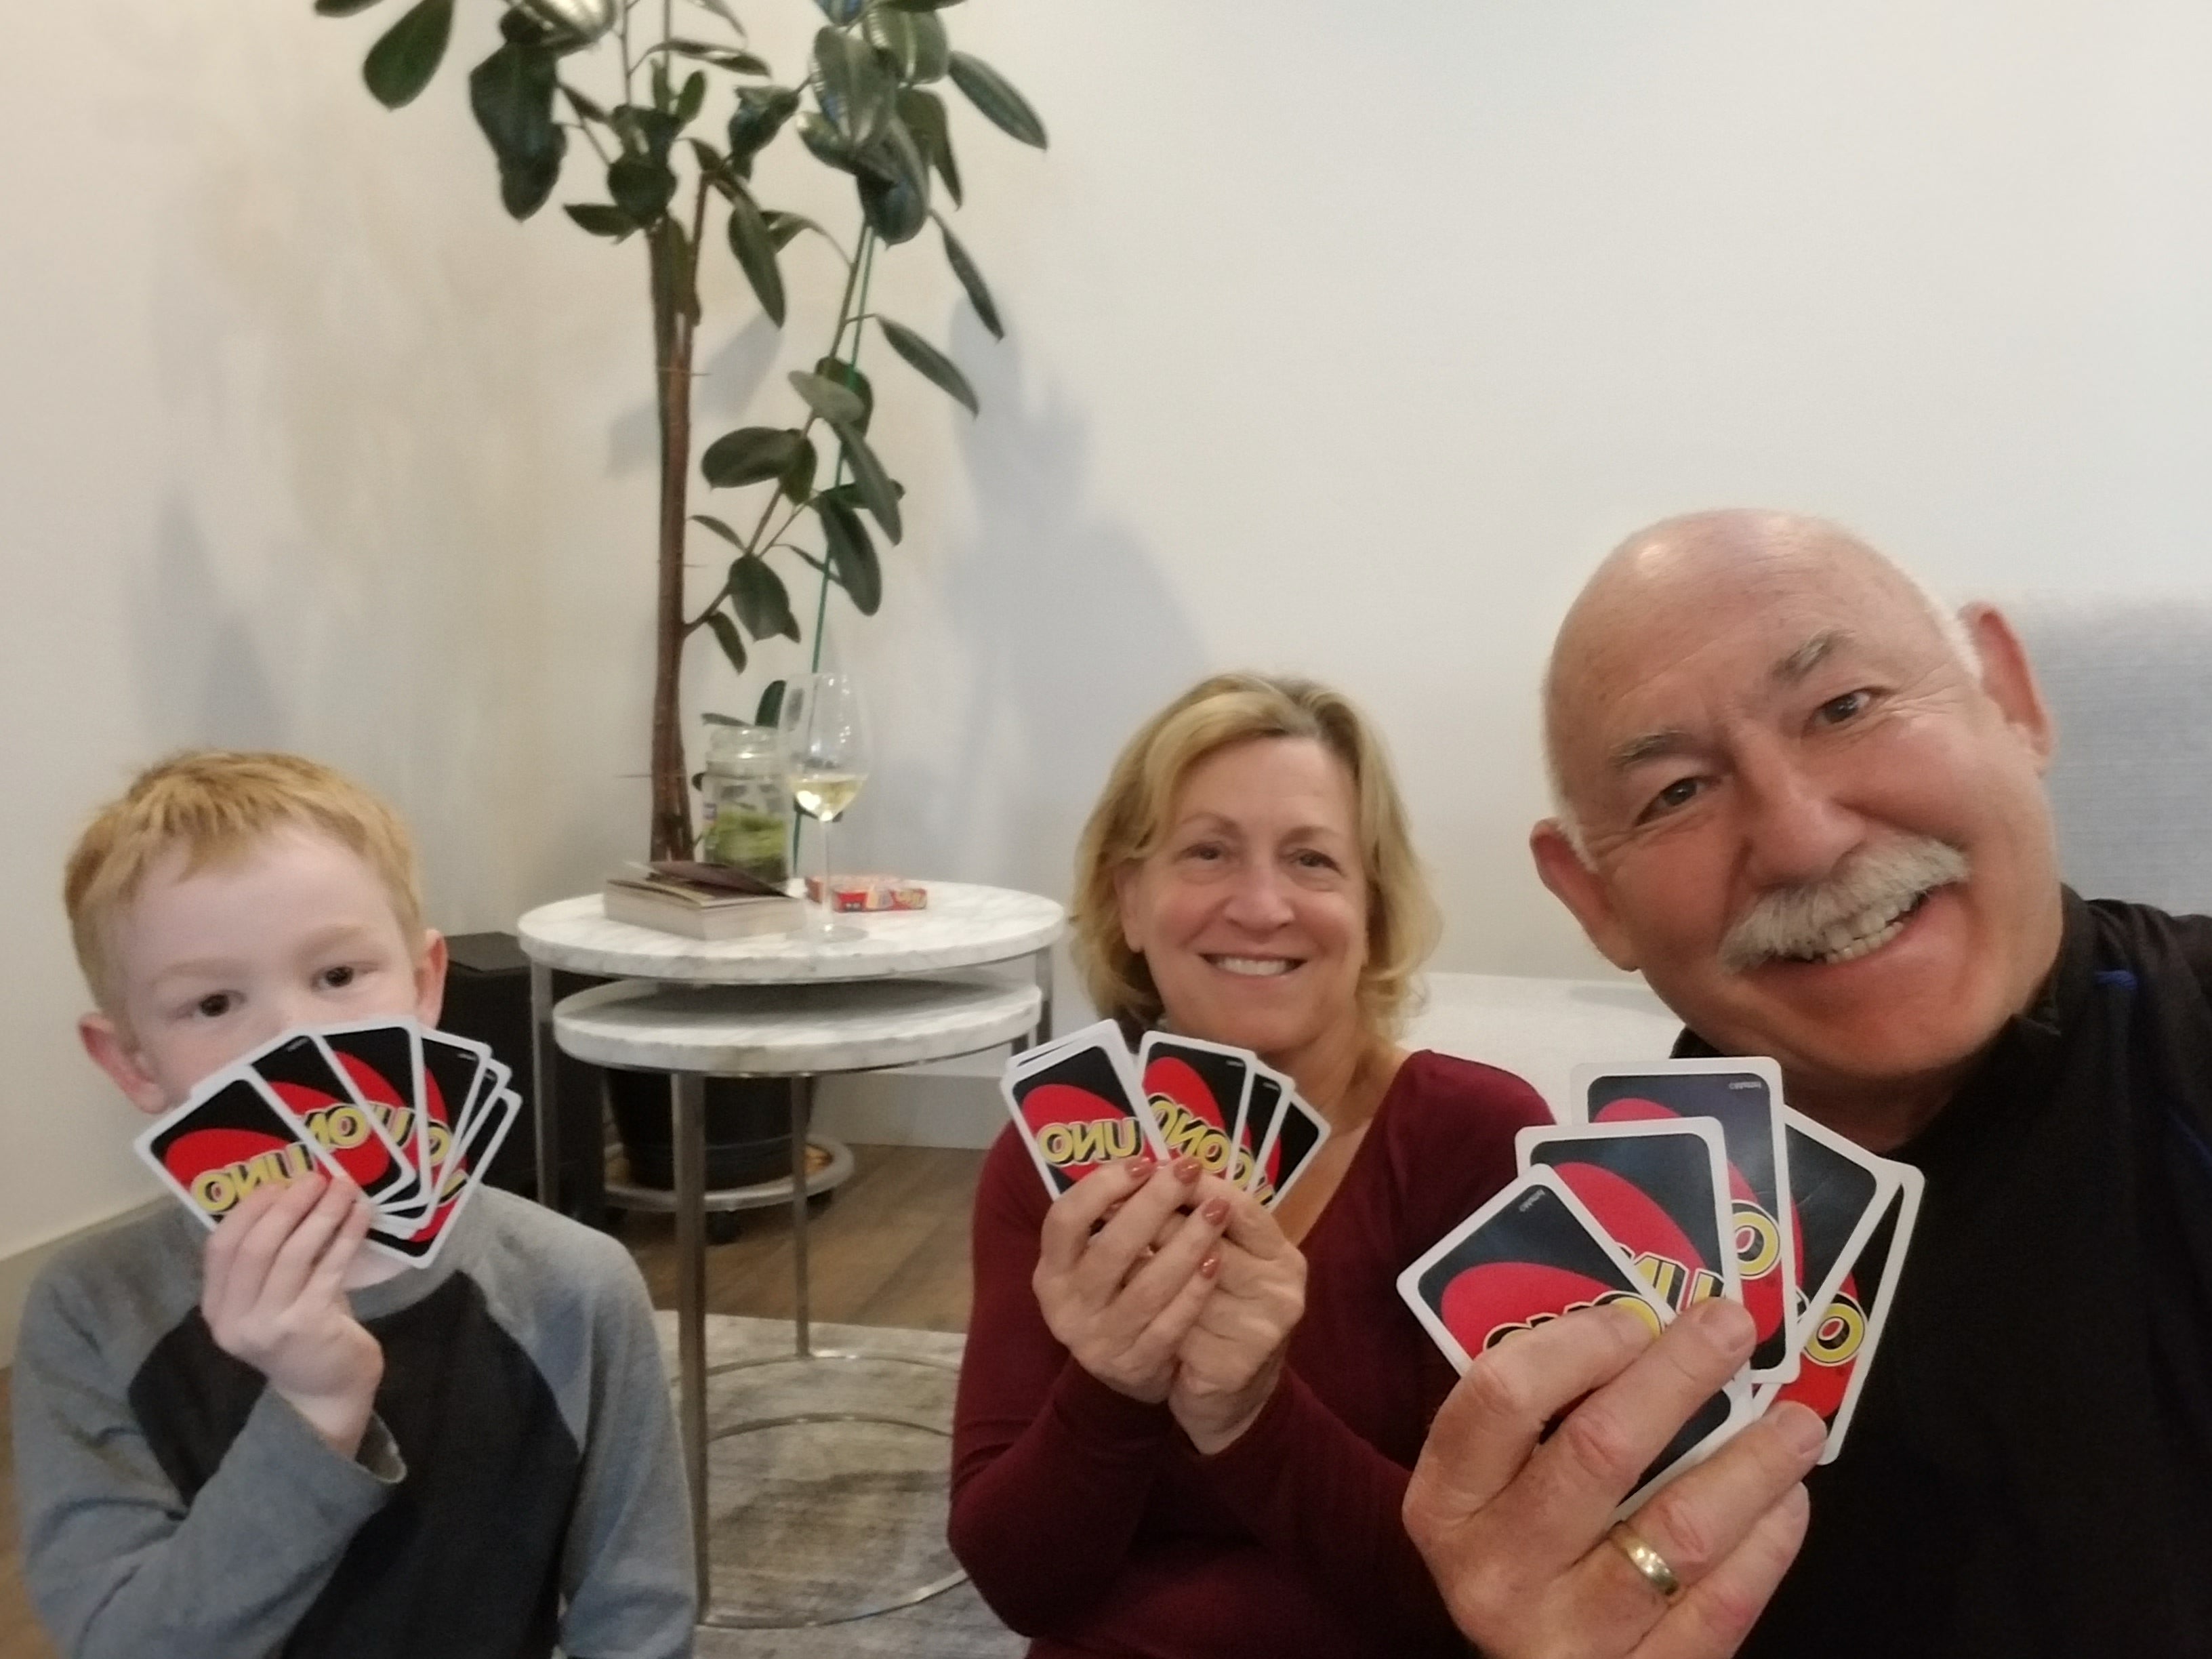 Ben Simko and family playing Uno